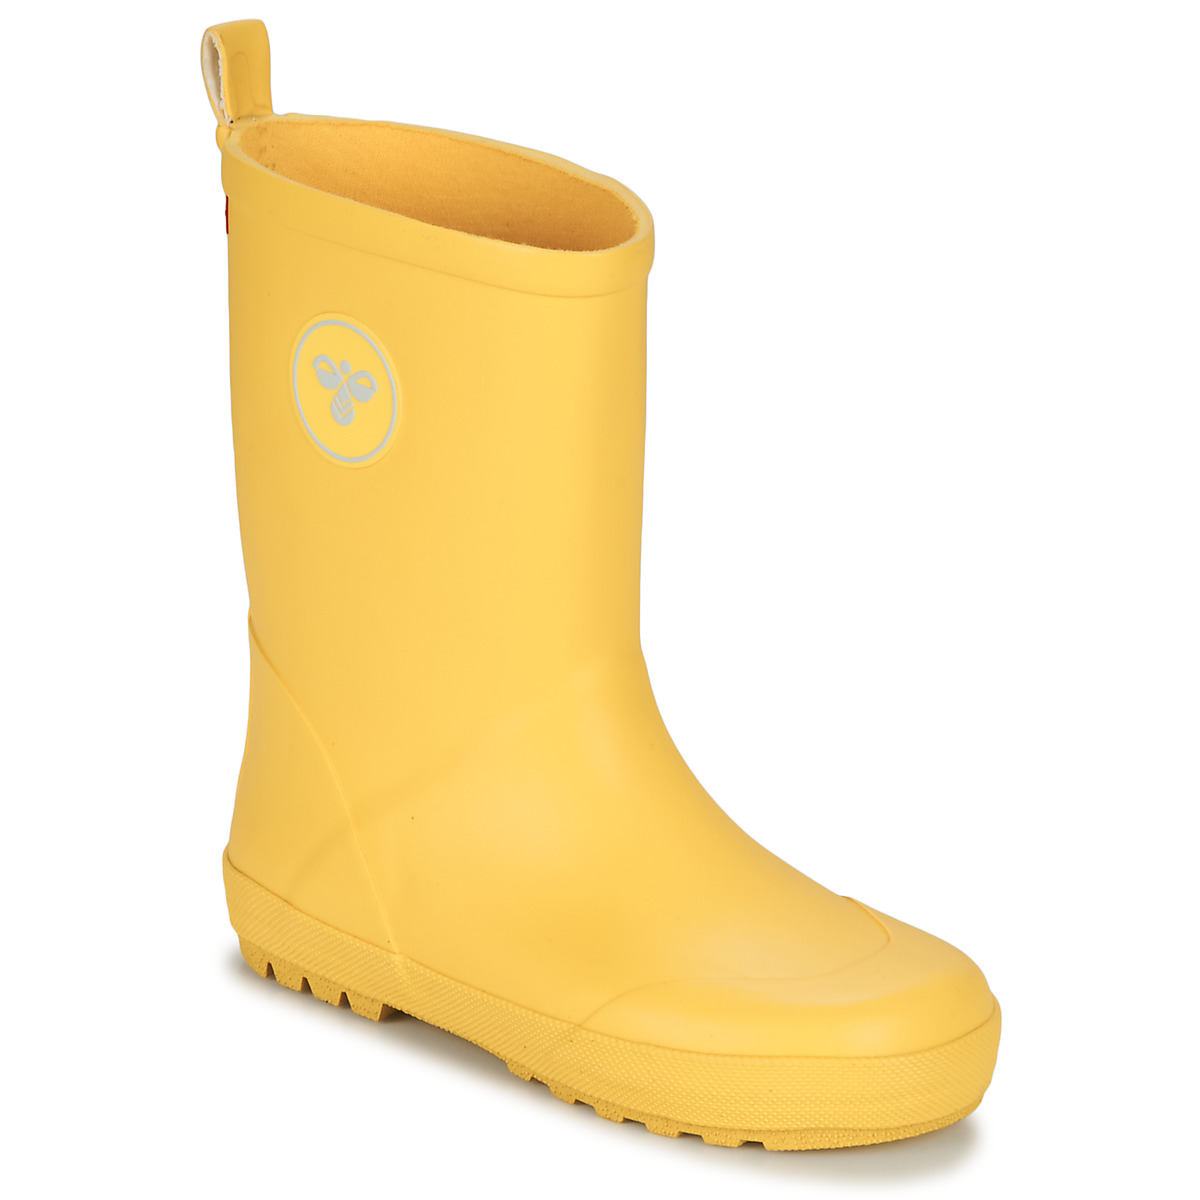 hummel RUBBER BOOT JR. Child | - Wellington Shoes Free delivery Yellow - boots NET Spartoo 